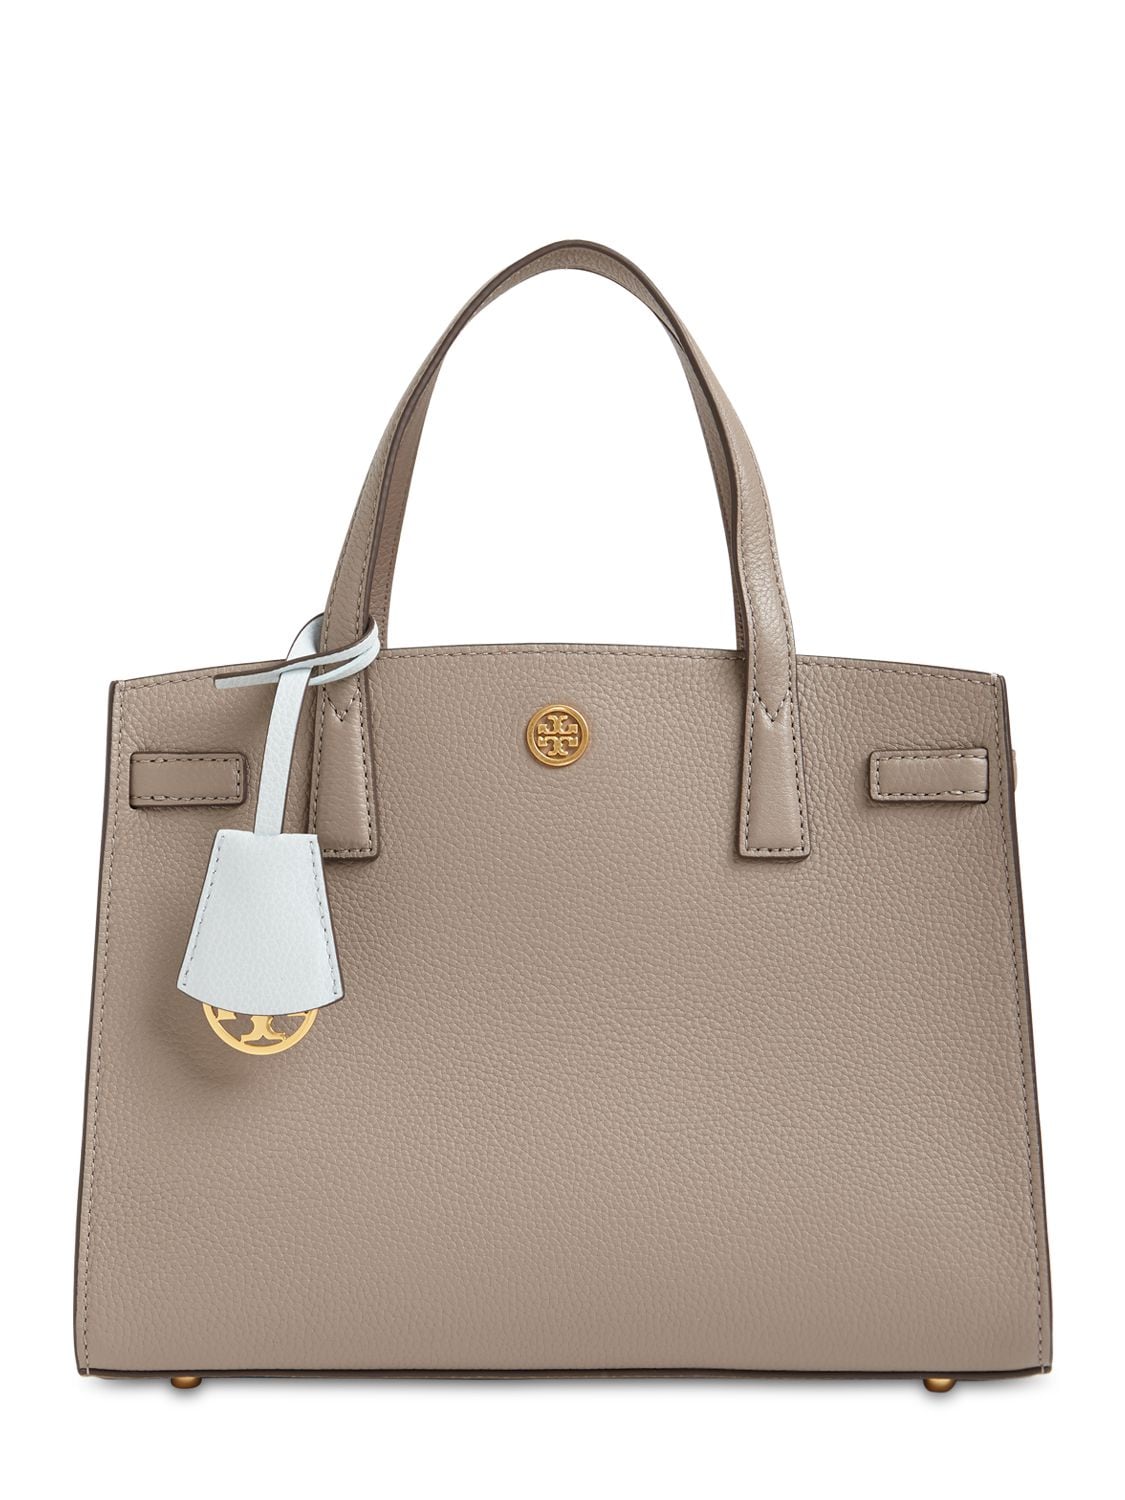 Tory Burch Walker Sm Grained Leather Bag In Grey Eron